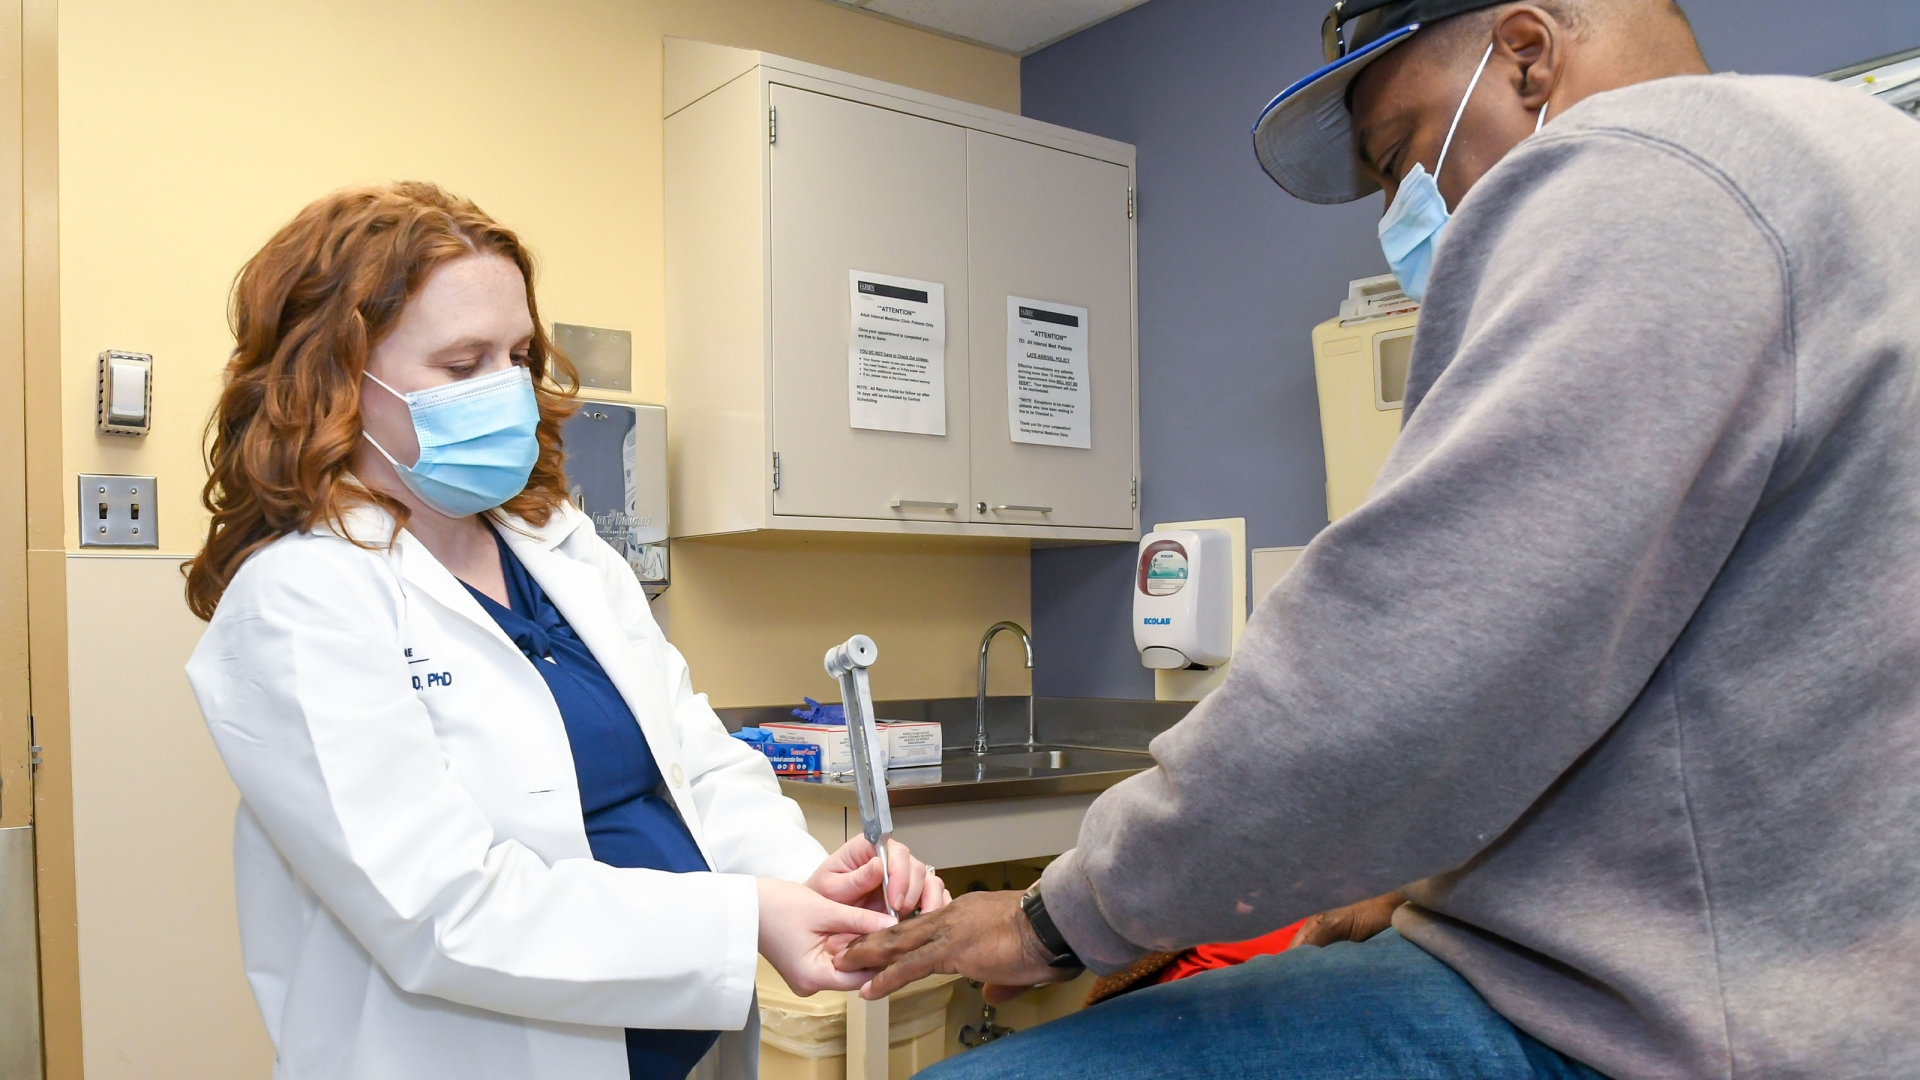 doctor in white coat with dark blue scrubs touching hand of patient in grey sweater and baseball cap in exam room 